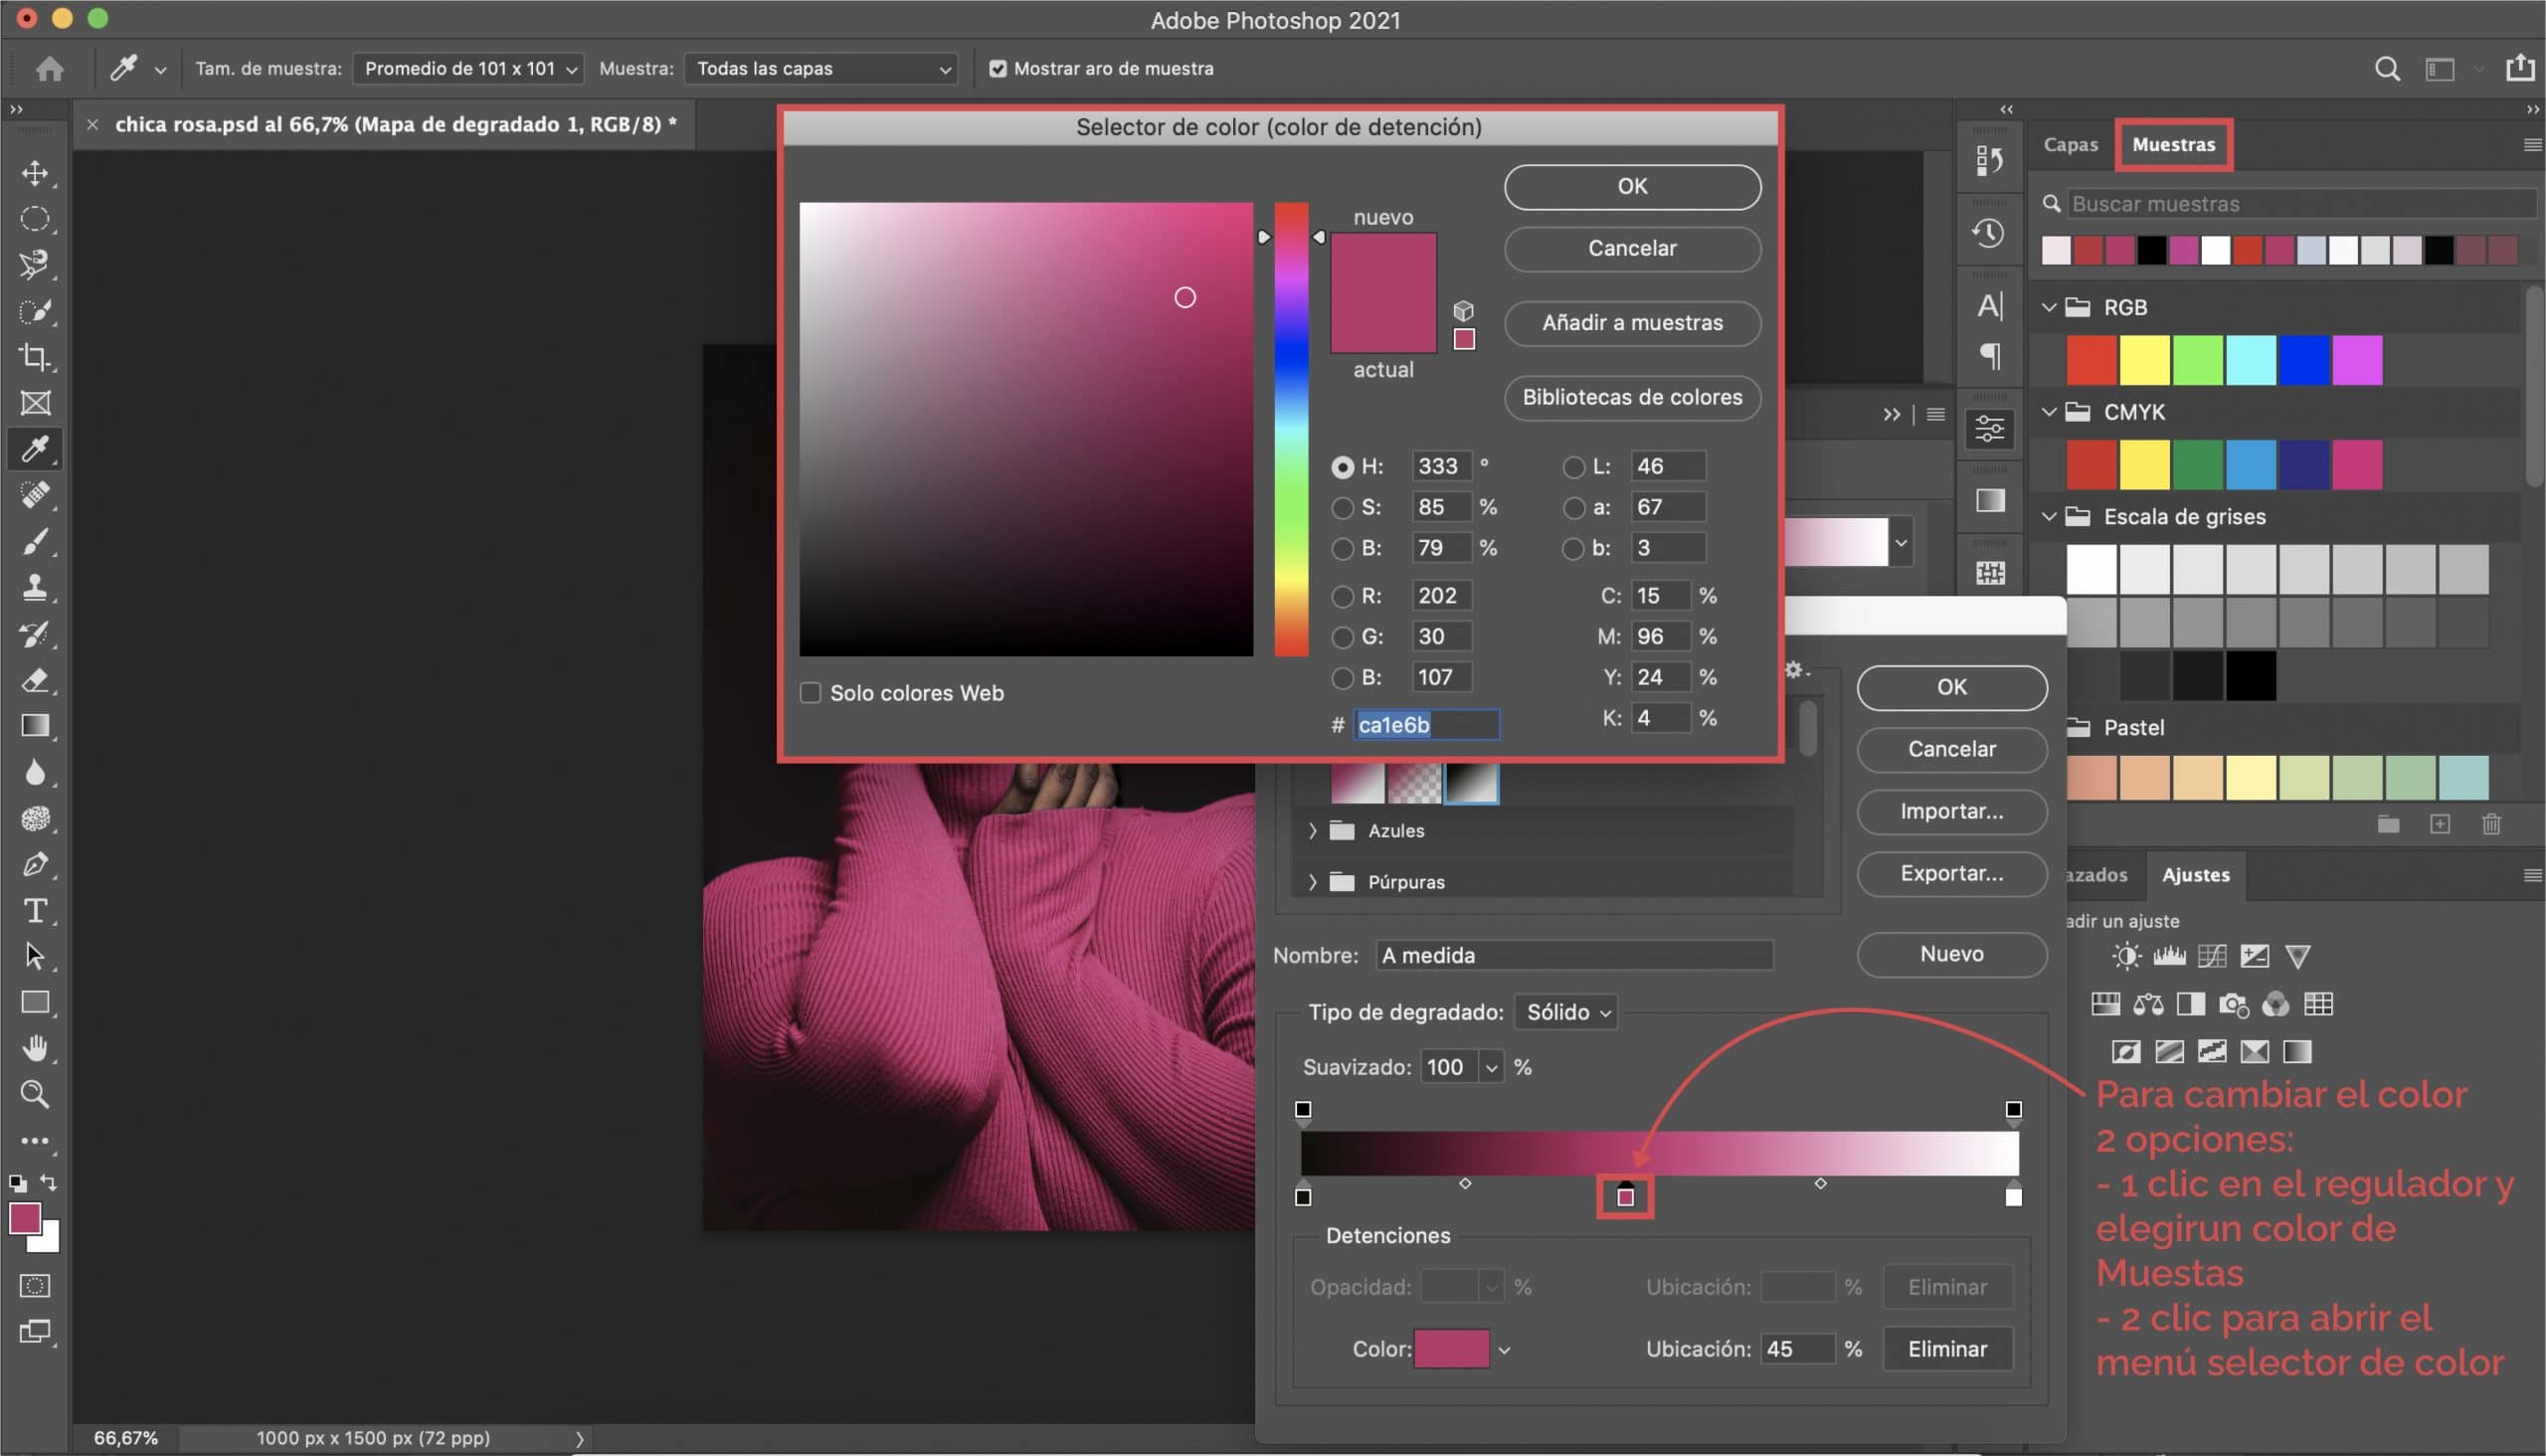 How to change the color in Photoshop